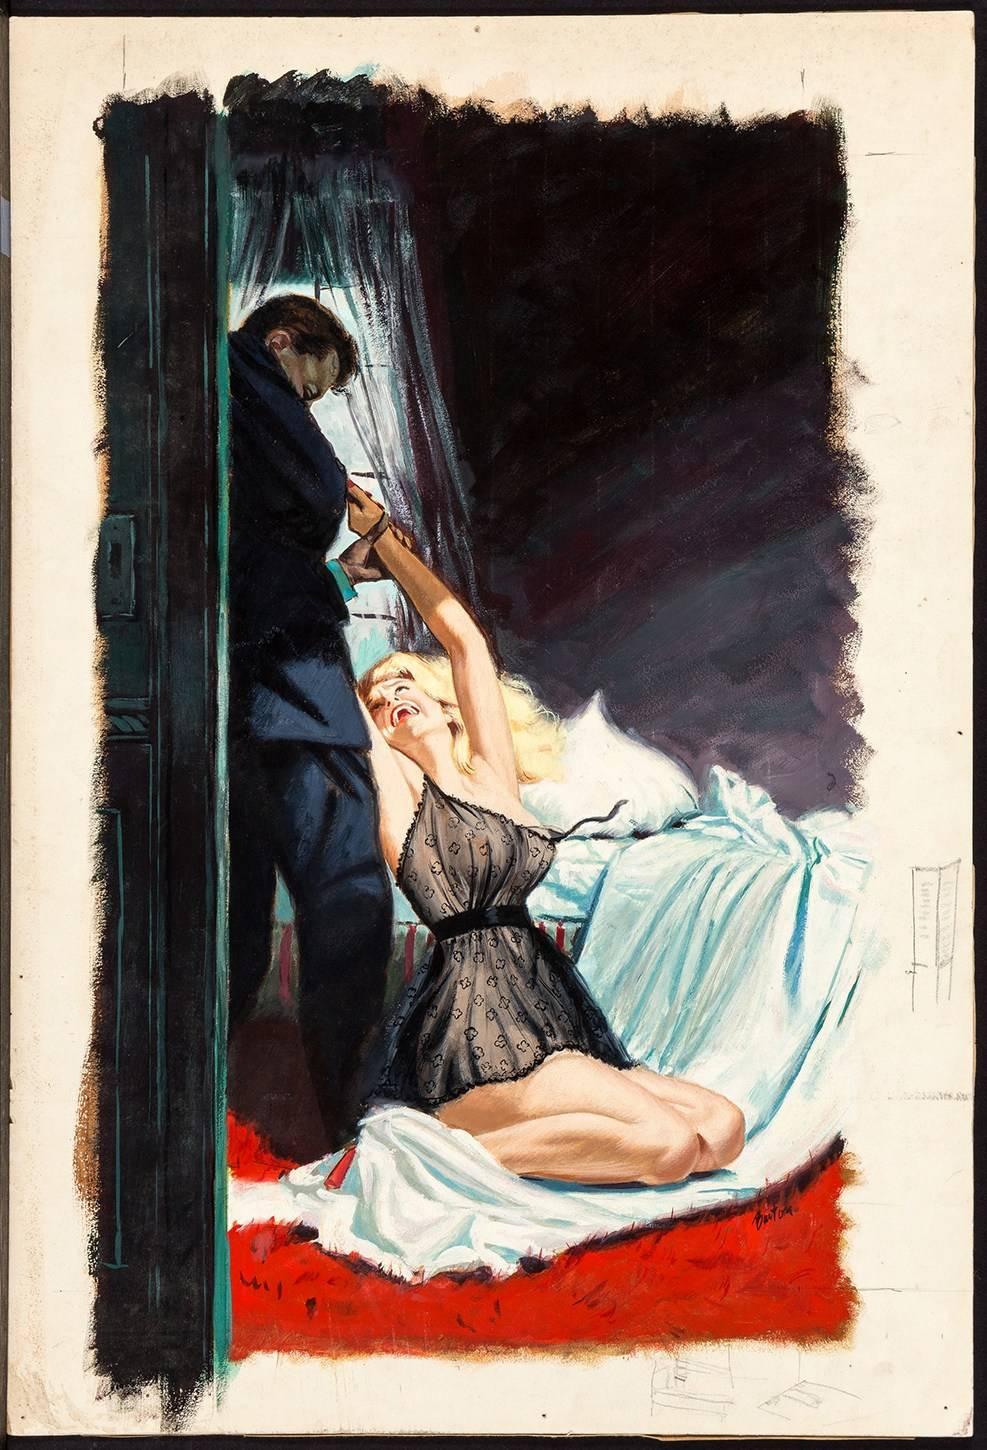 A signed gouache on illustration board painting by Harry Barton, created as the cover for Dorine Clark's 1959 novel Hell Cat. This original artwork is a prime example of the boundary pushing, subversive imagery that helped draw readers to the taboo